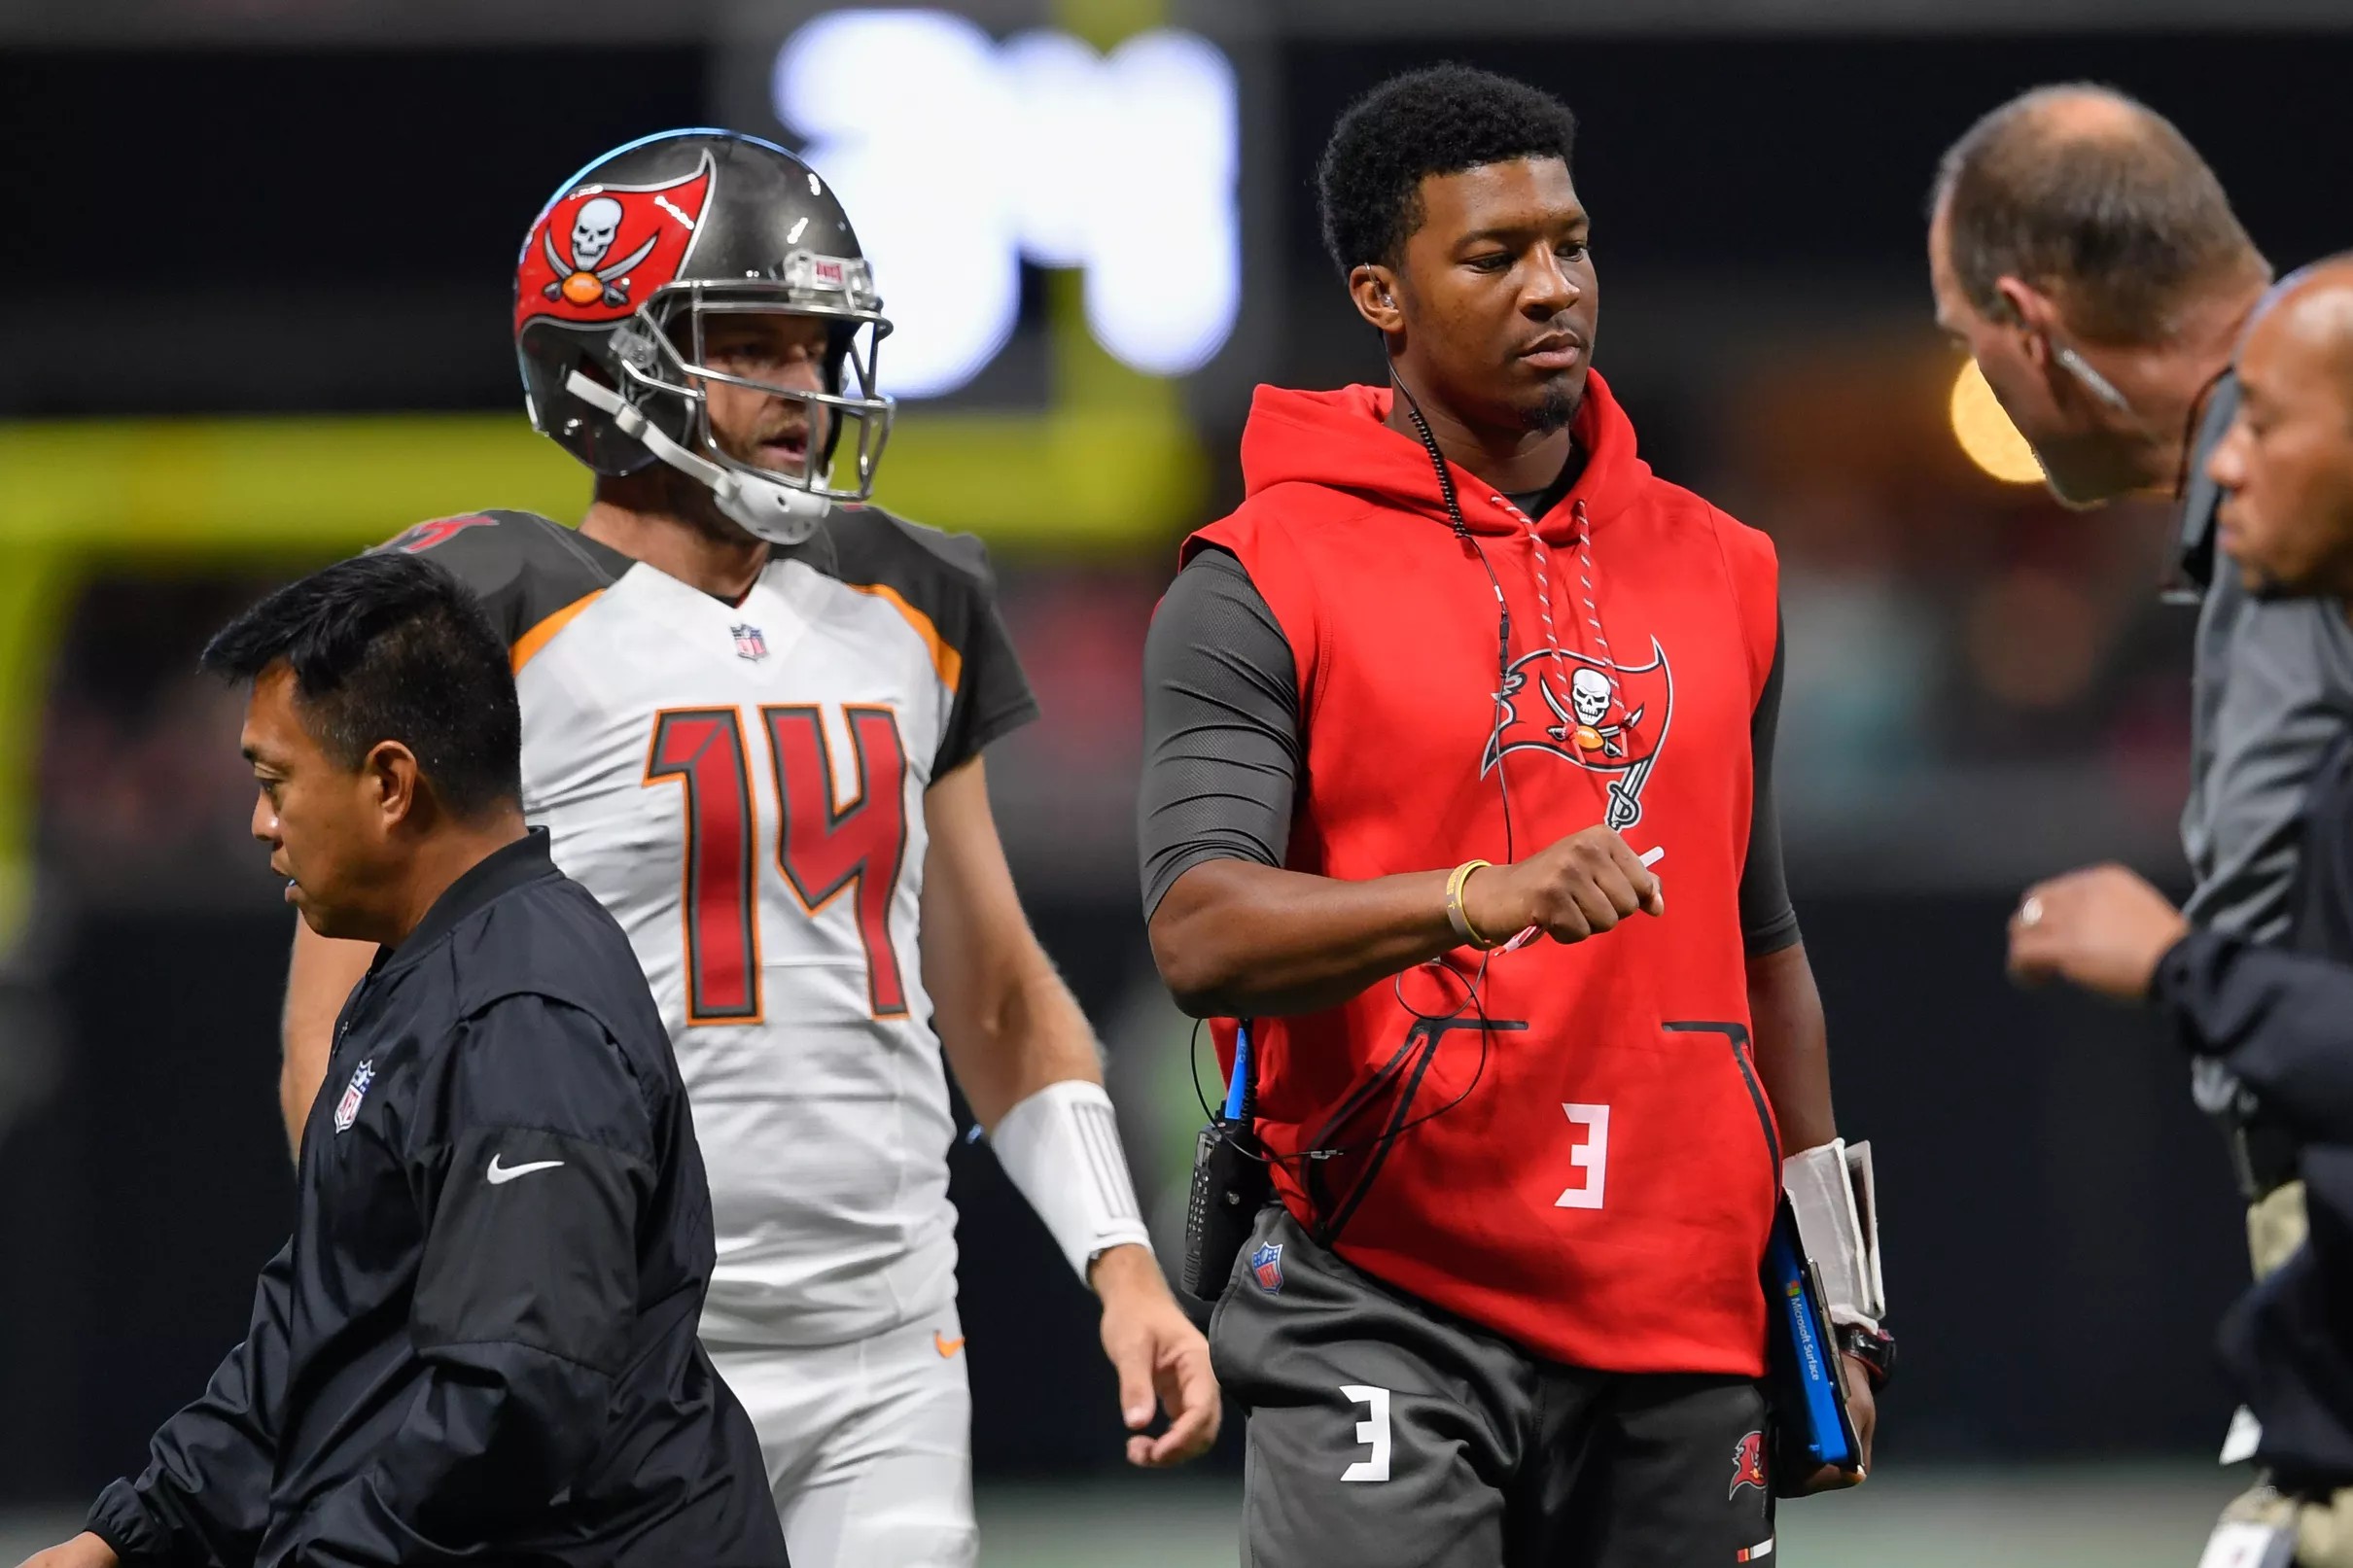 Jameis Winston could return against the Packers